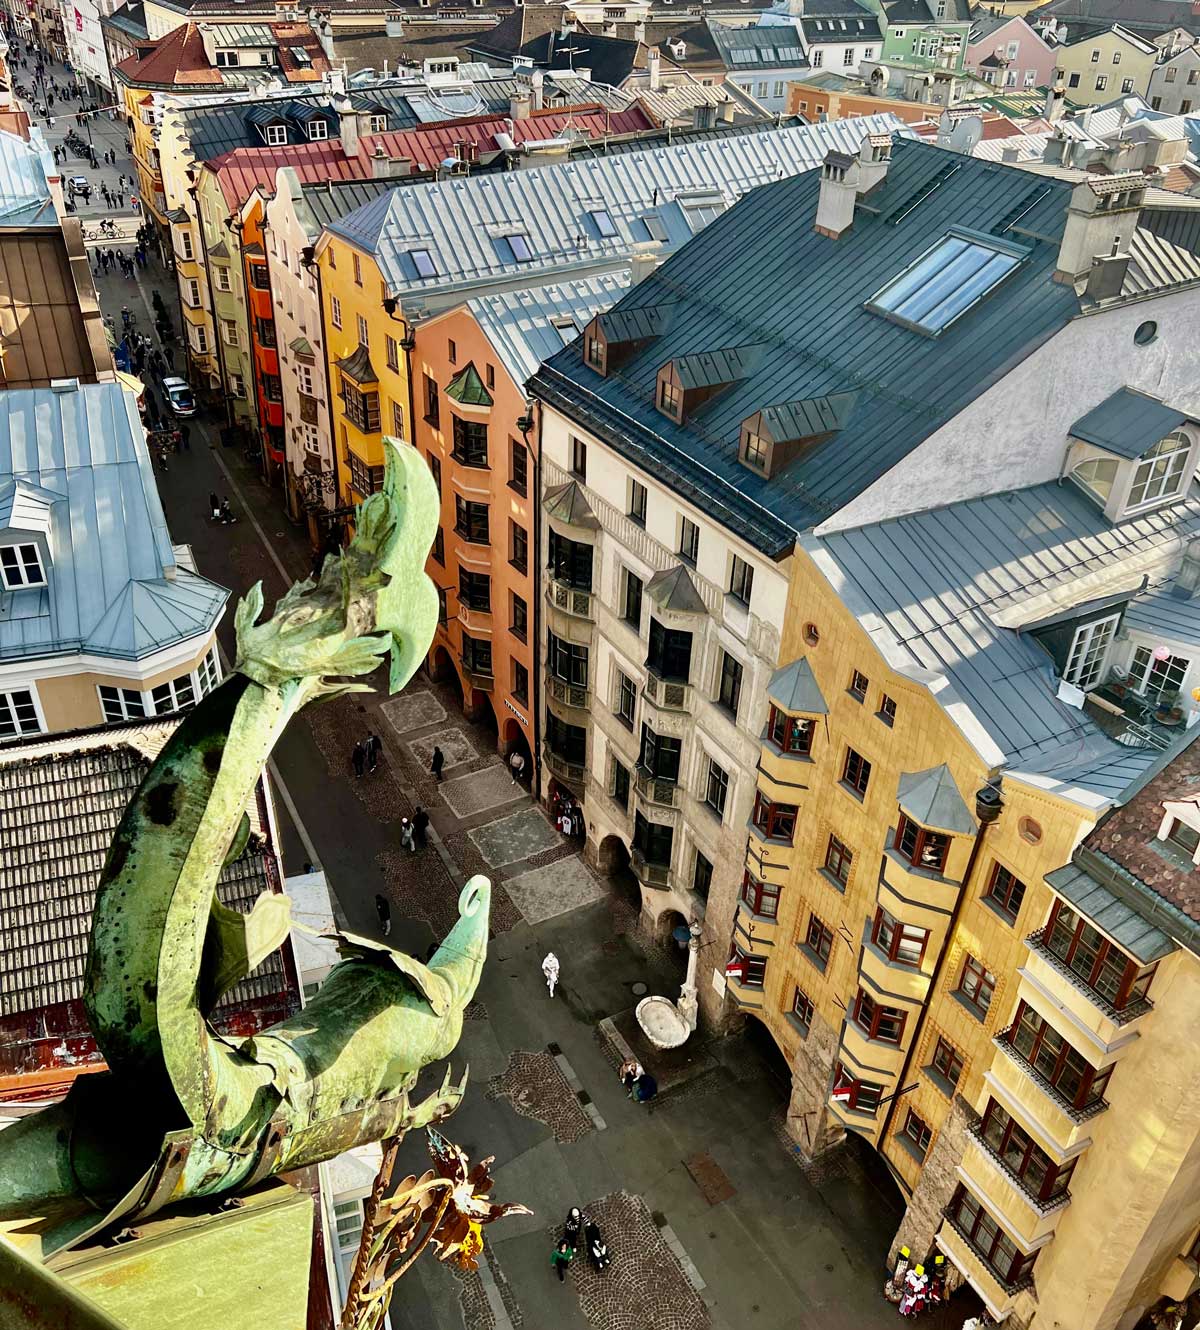 A view of the rooftops below from atop the Innsbruck City Tower, one of the best things to do in Innsbruck with kids this winter.